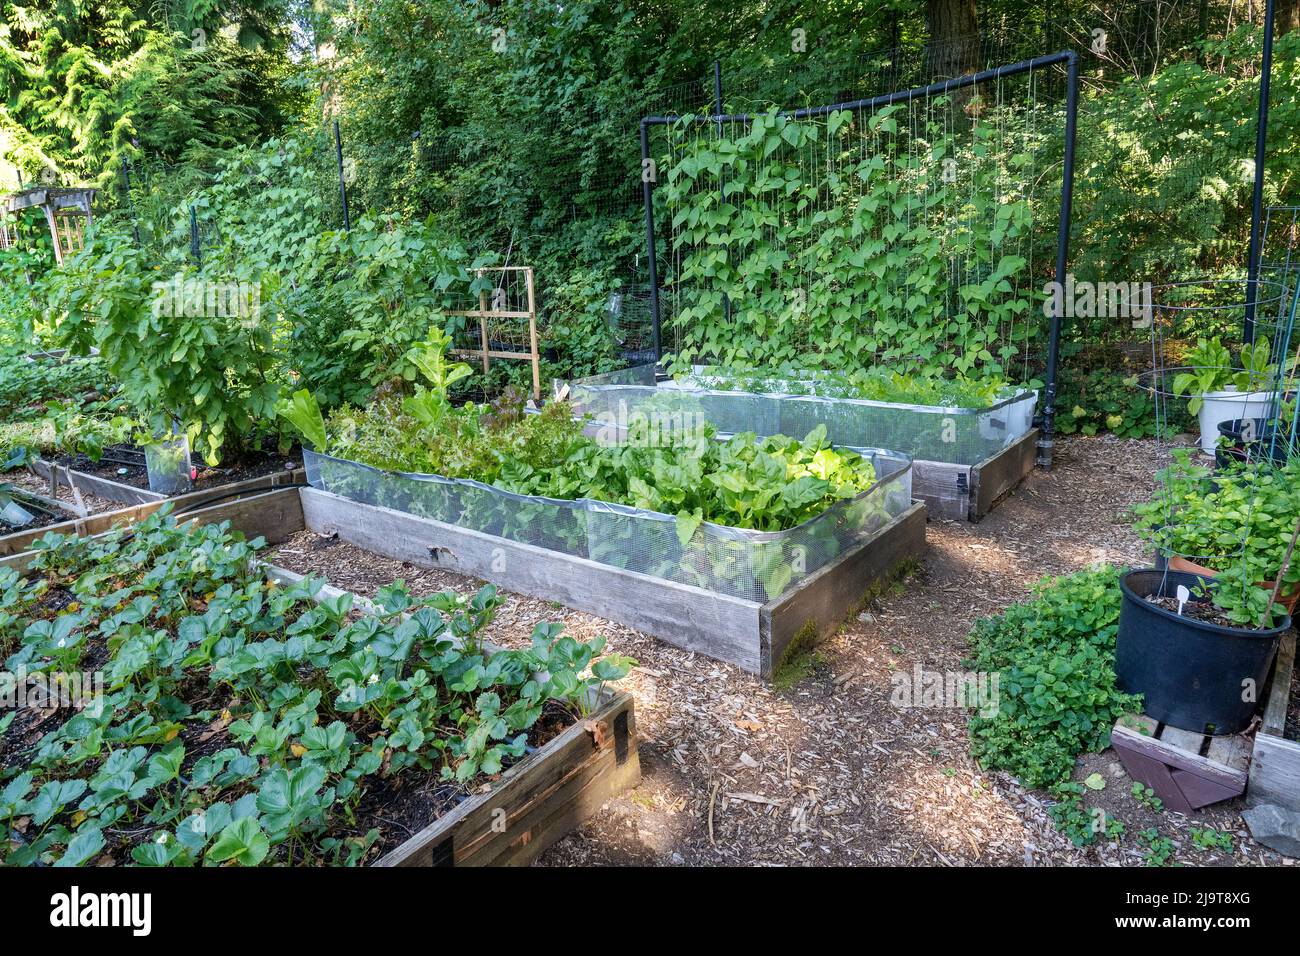 Issaquah, Washington State, USA. Raised garden beds in a community garden containing strawberries, Chioggia beets, lettuce and pole beans. (PR) Stock Photo